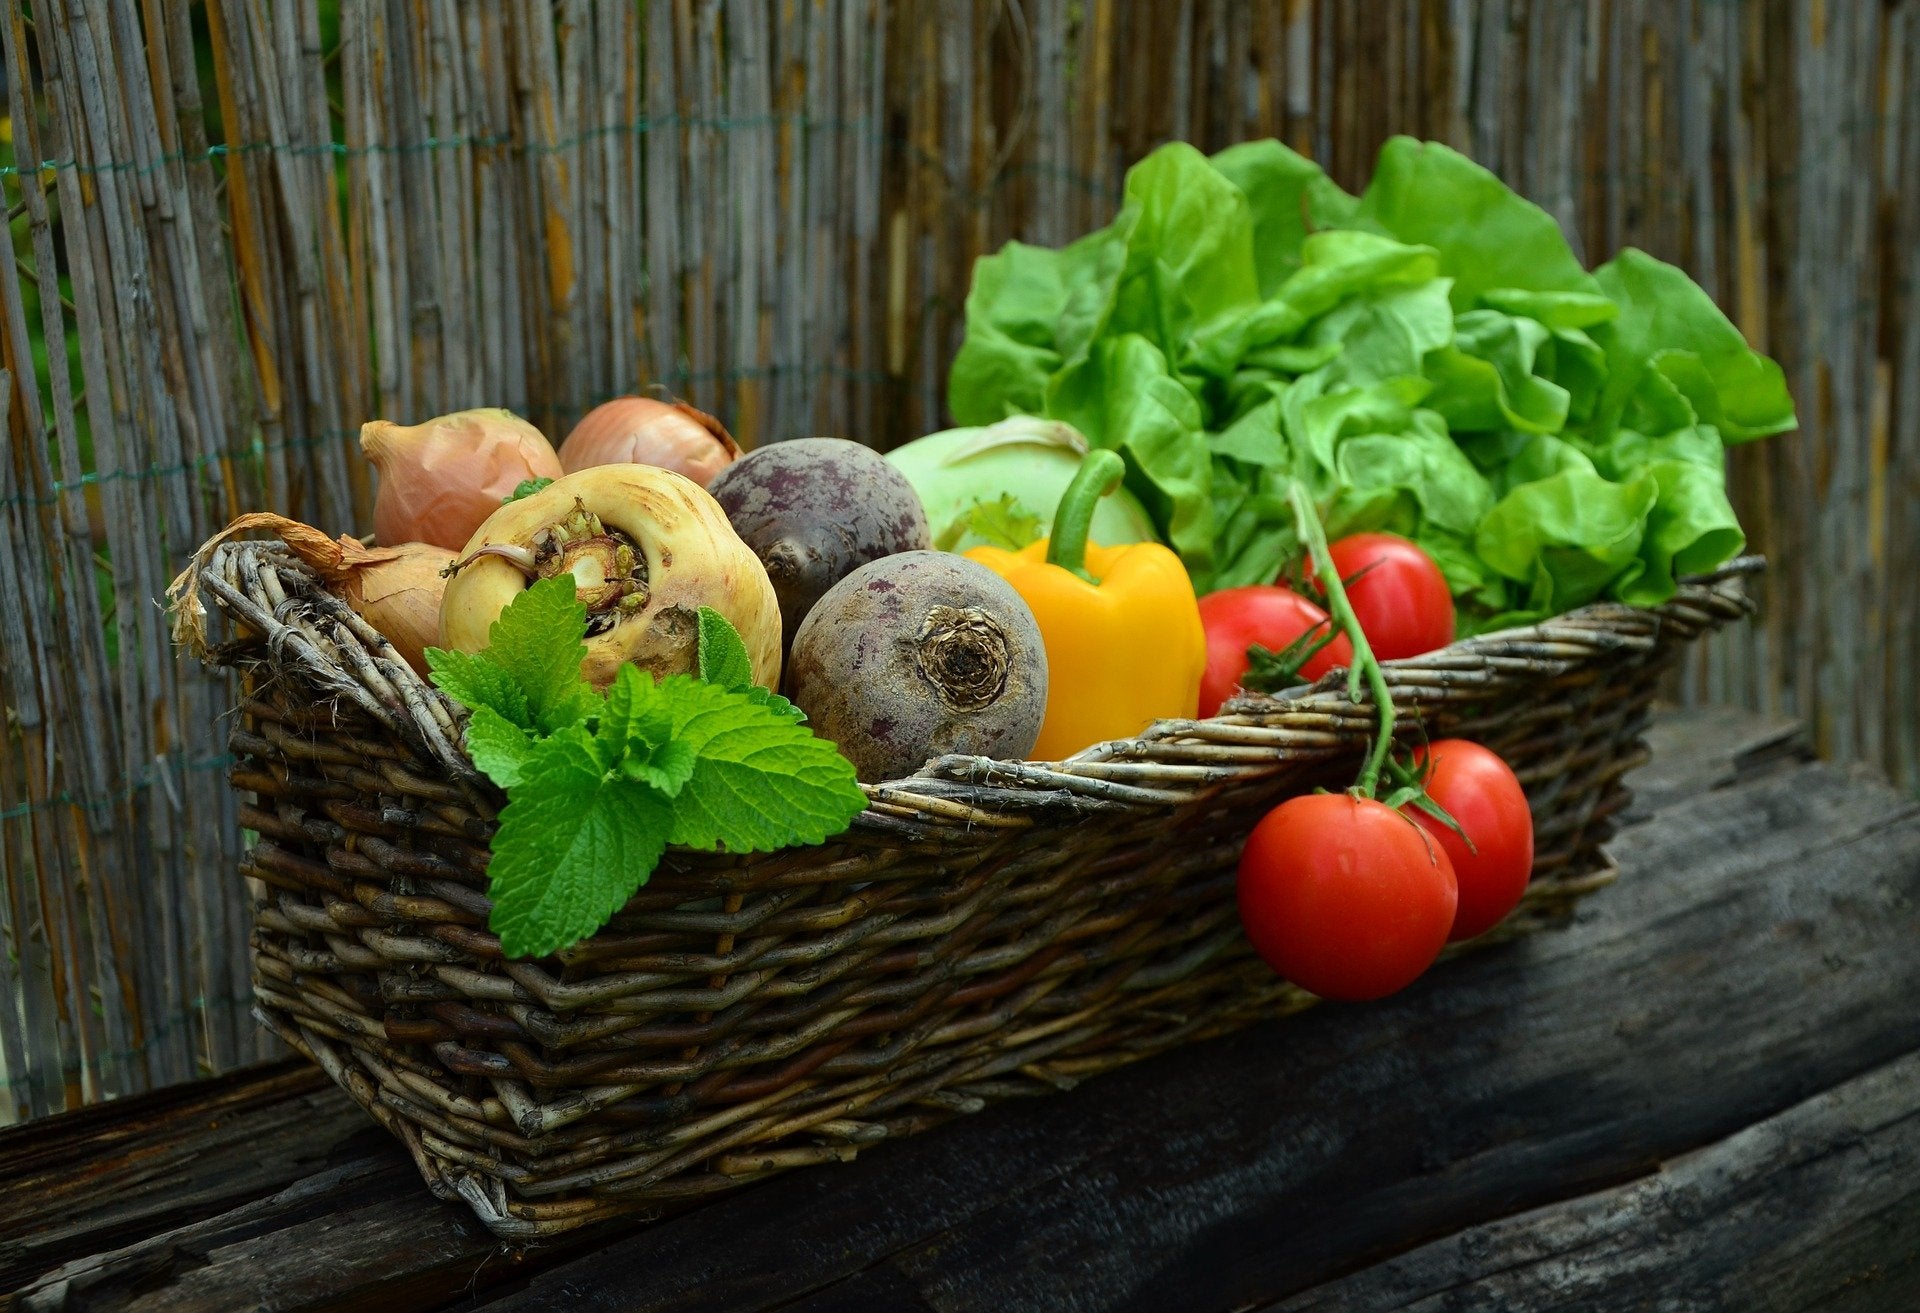 Starting a Garden, the basics to jumpstart and harvest fruits and veggies